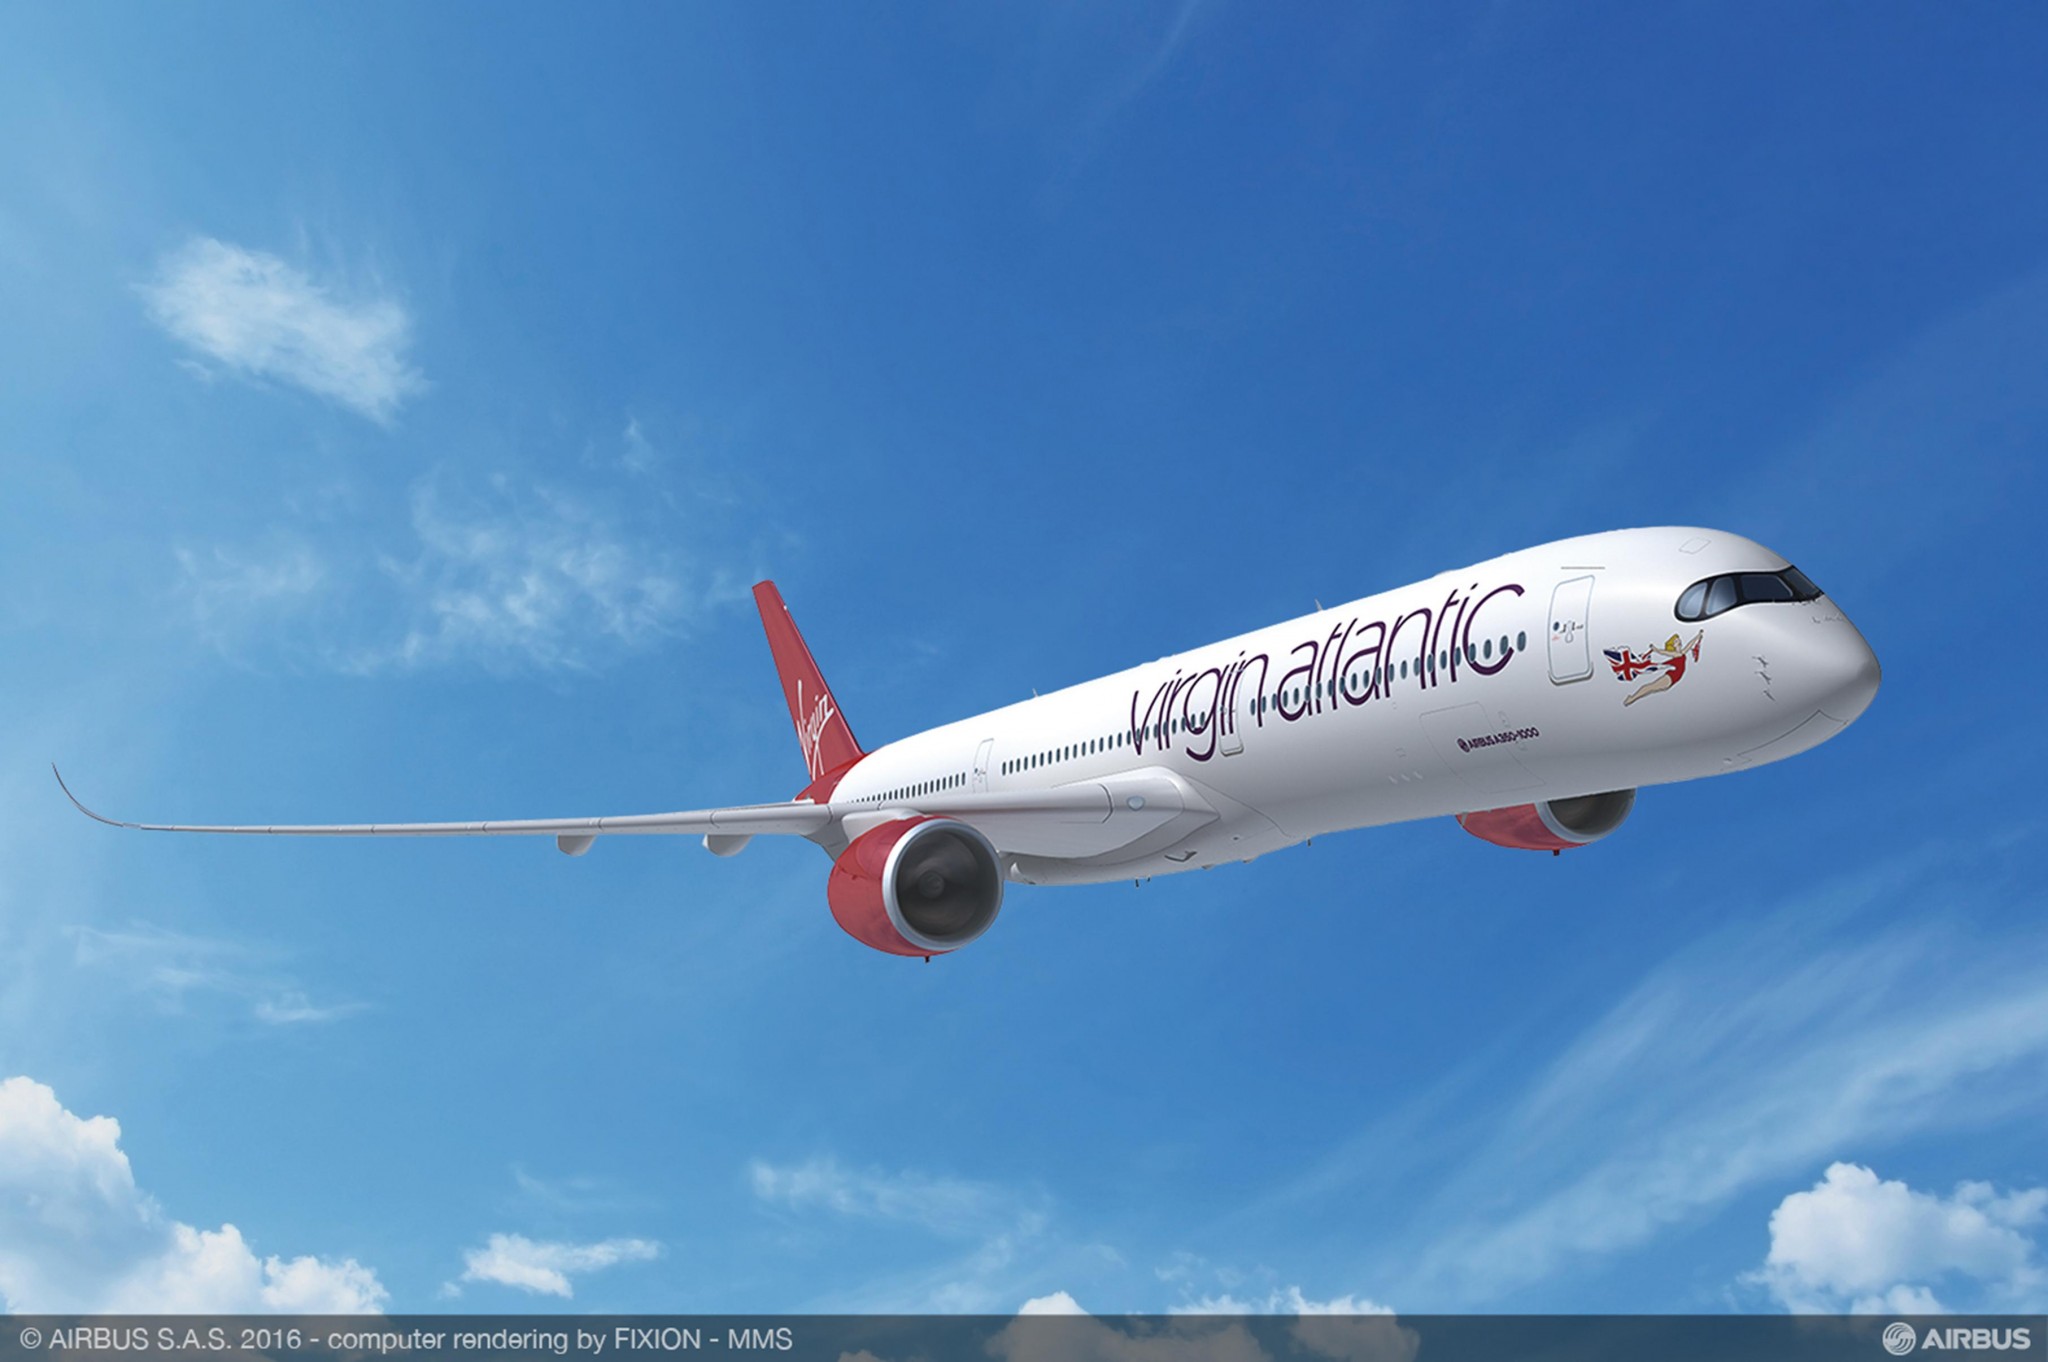 Virgin Atlantic to launch only direct flight between London Heathrow and Barbados